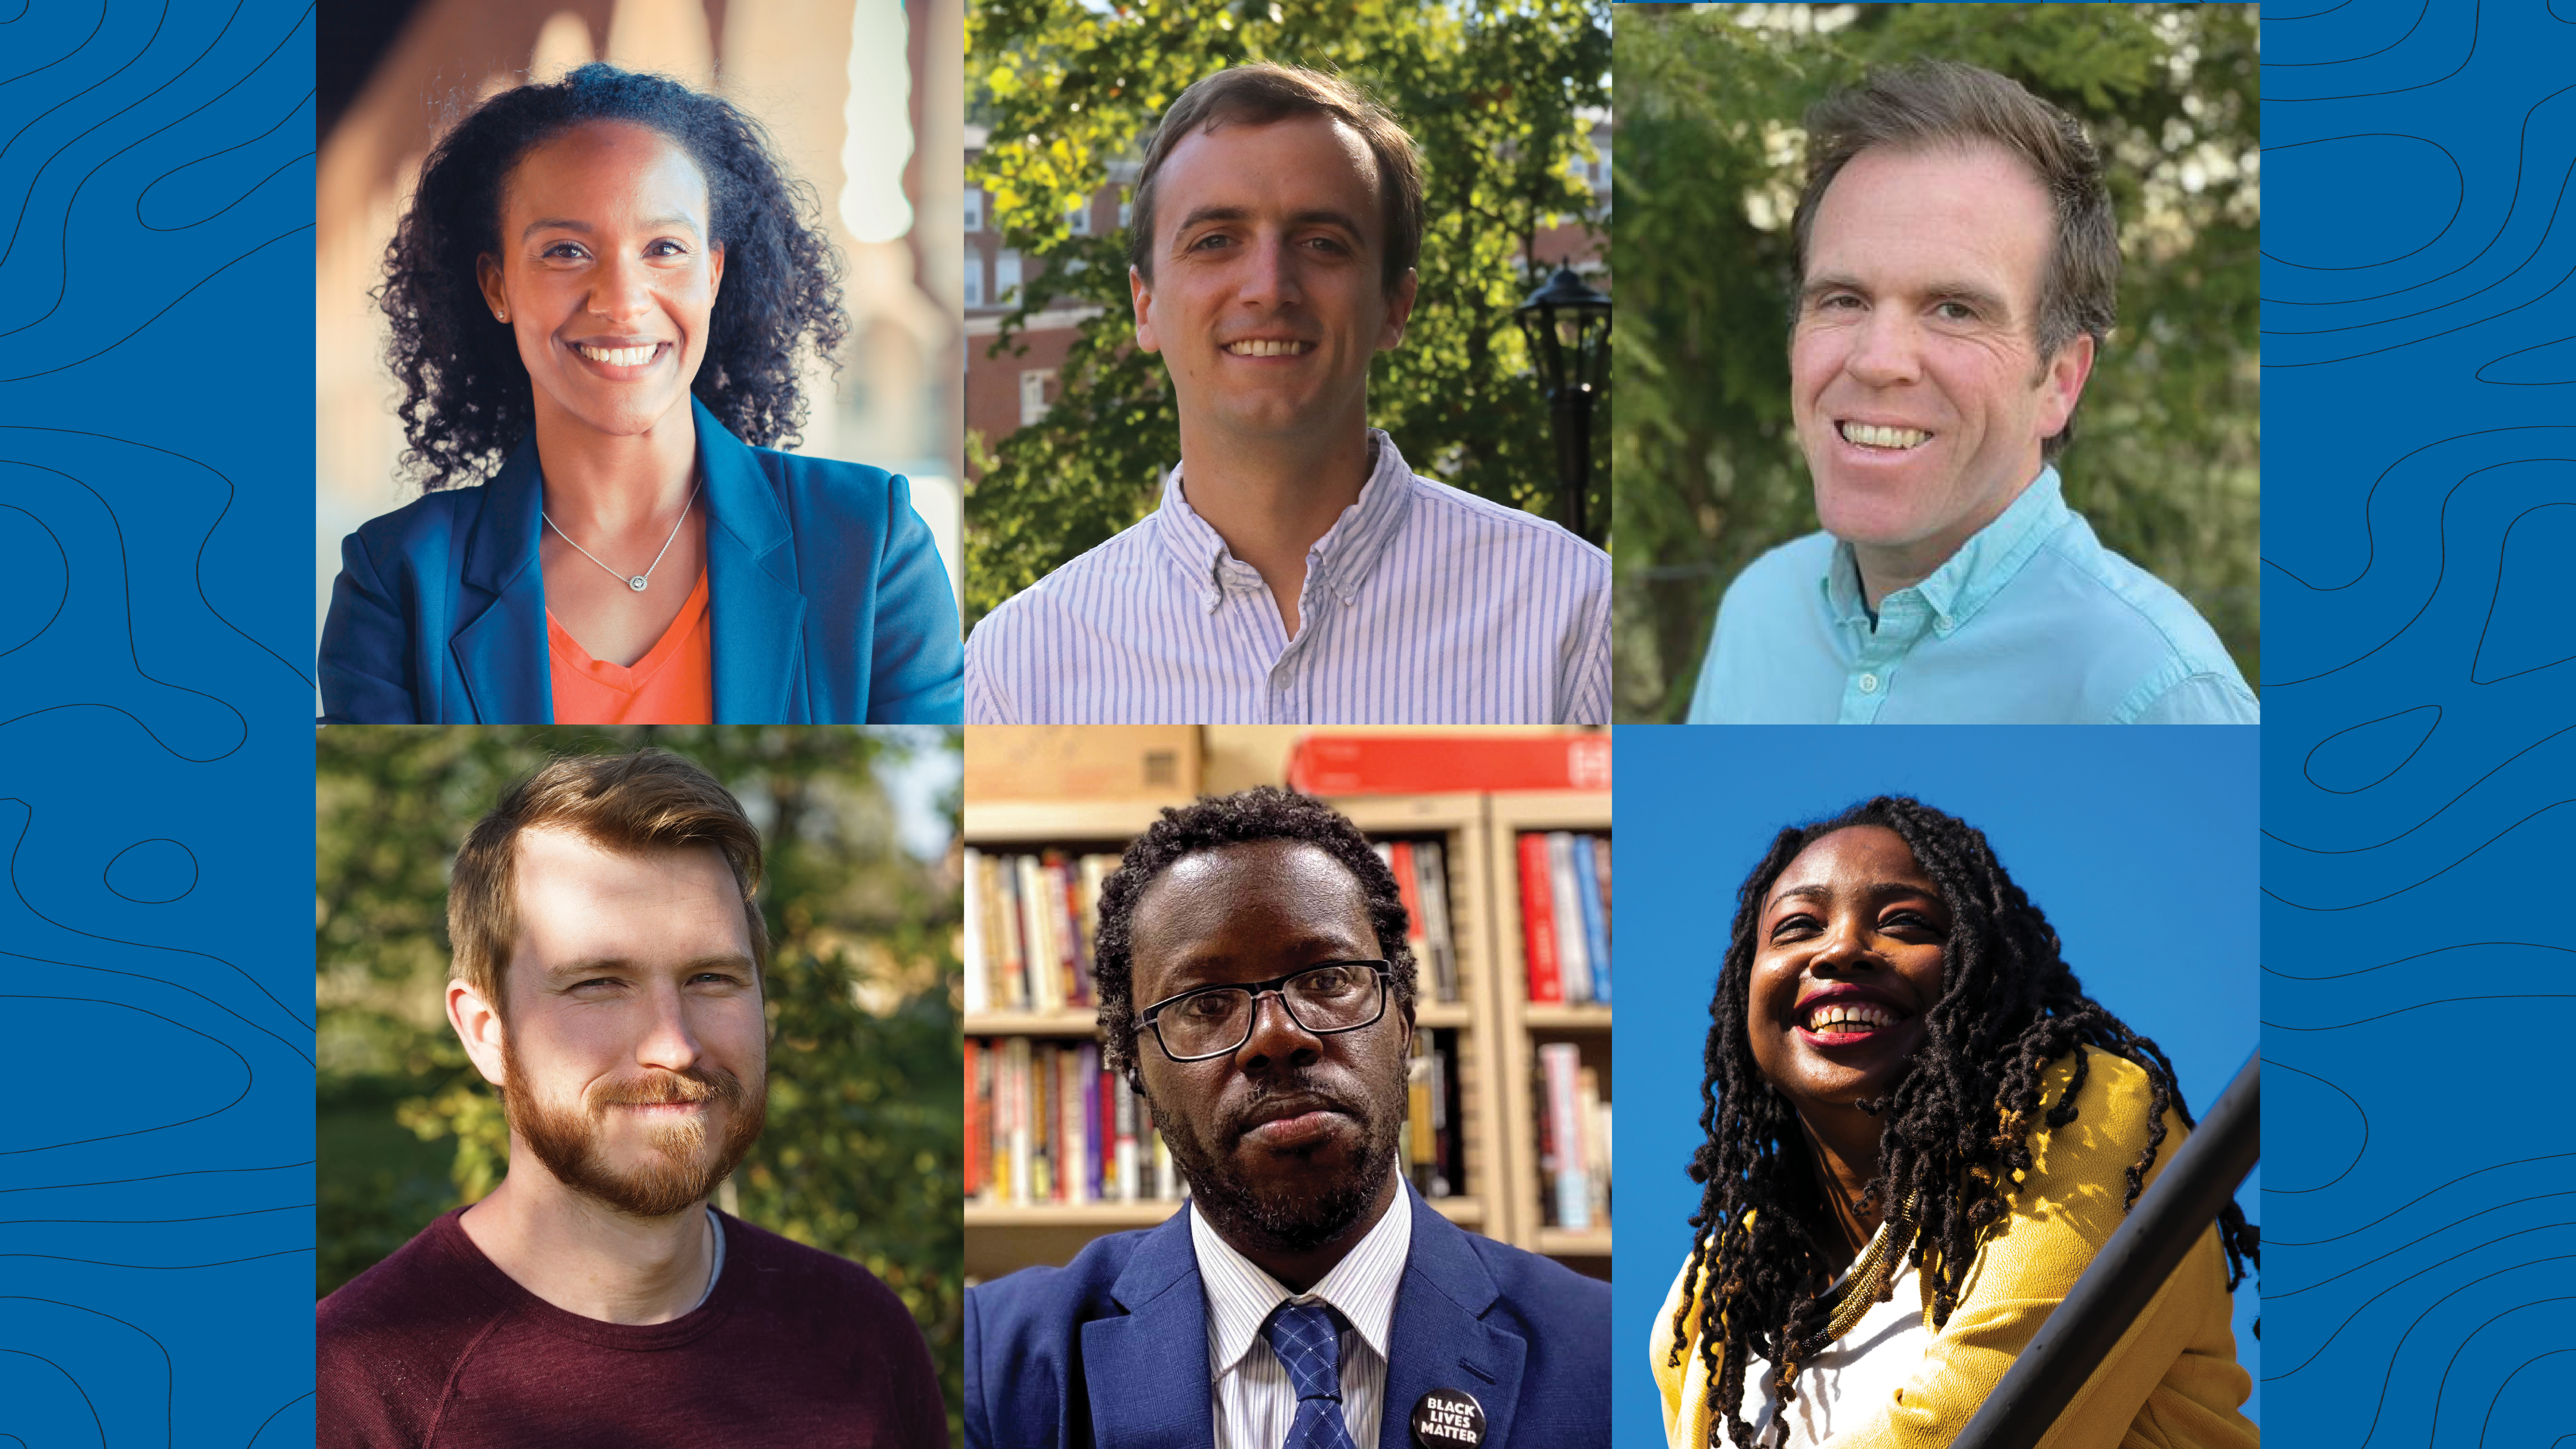 Six faculty members in the Eberly College of Arts and Sciences were awarded fellowship grants by the West Virginia Humanities Council. The 2023 Humanities Council Fellows from Eberly College are Brooke Durham, Enkeshi El-Amin, Sean Lawrence, Austin McCoy, Mason Moseley and Devin Smart. 
